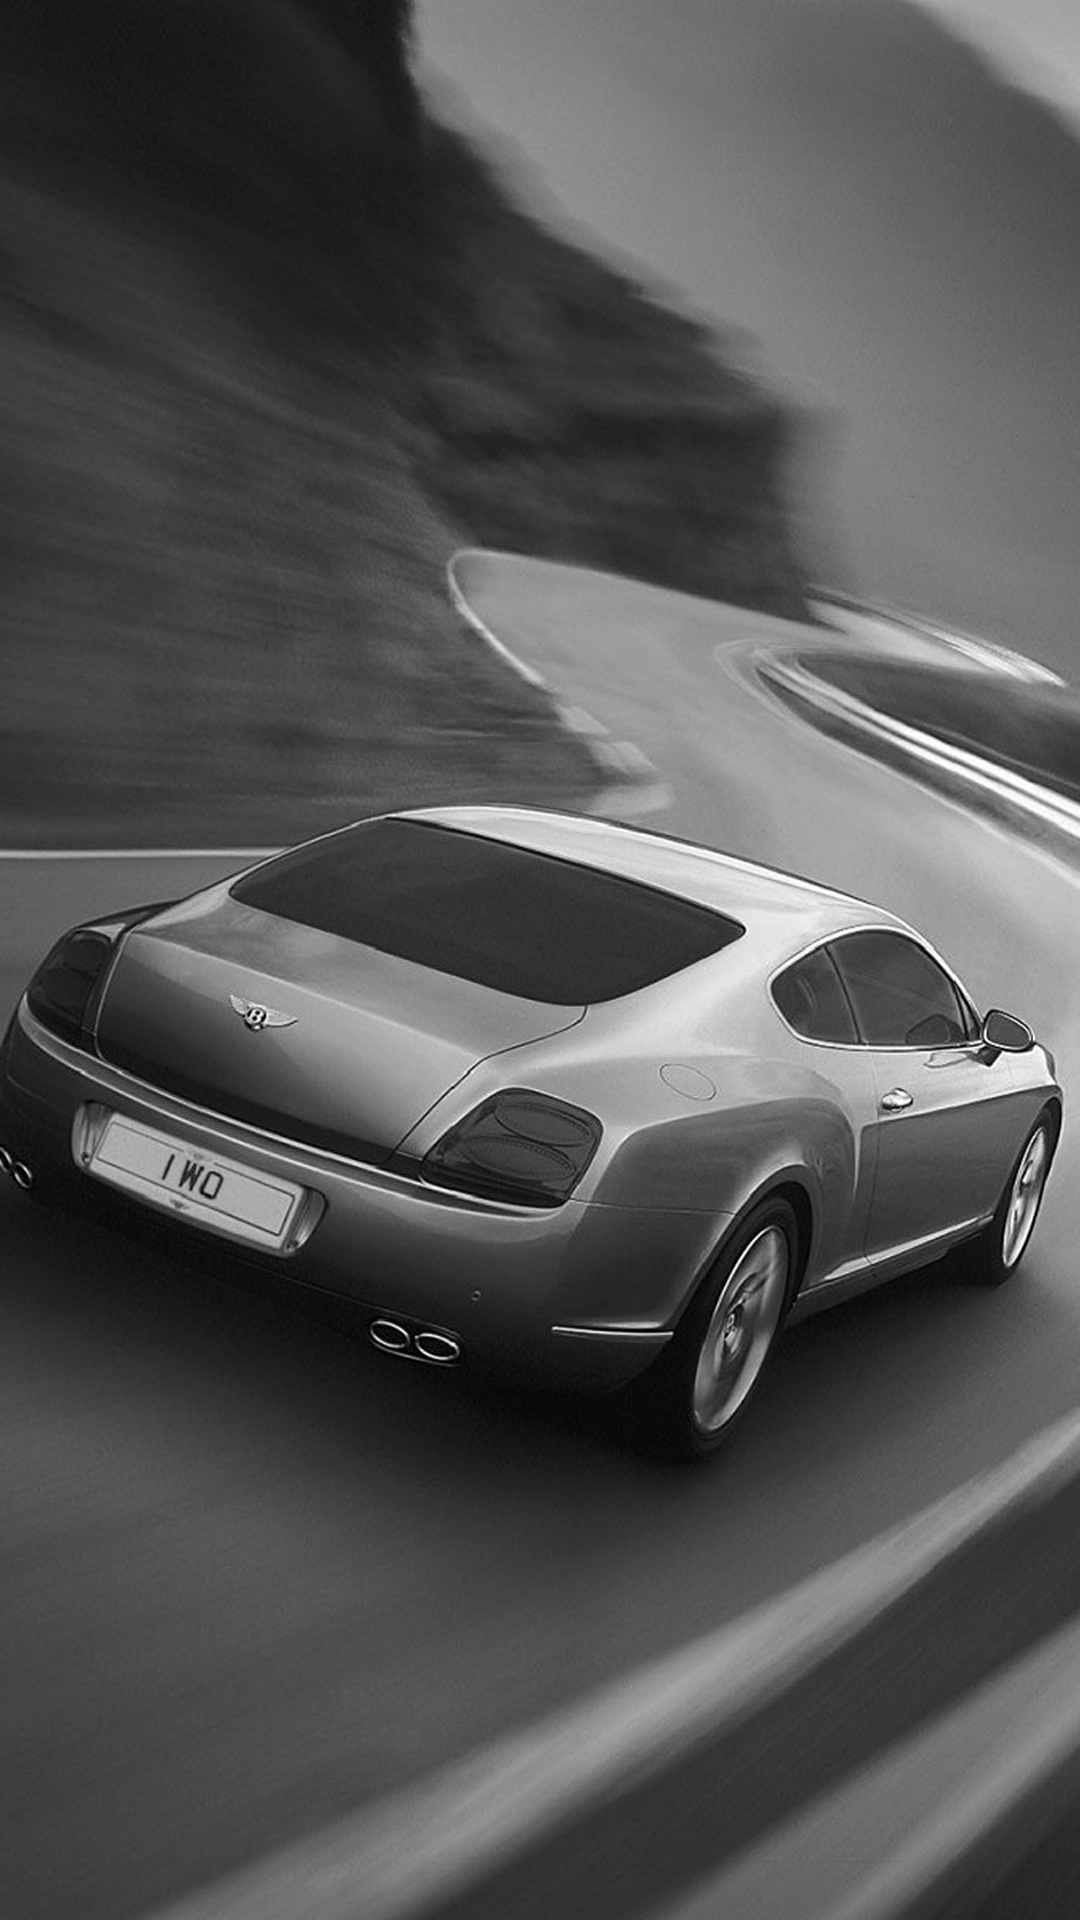 Bentley Continental Gt Black And White Android Wallpaper